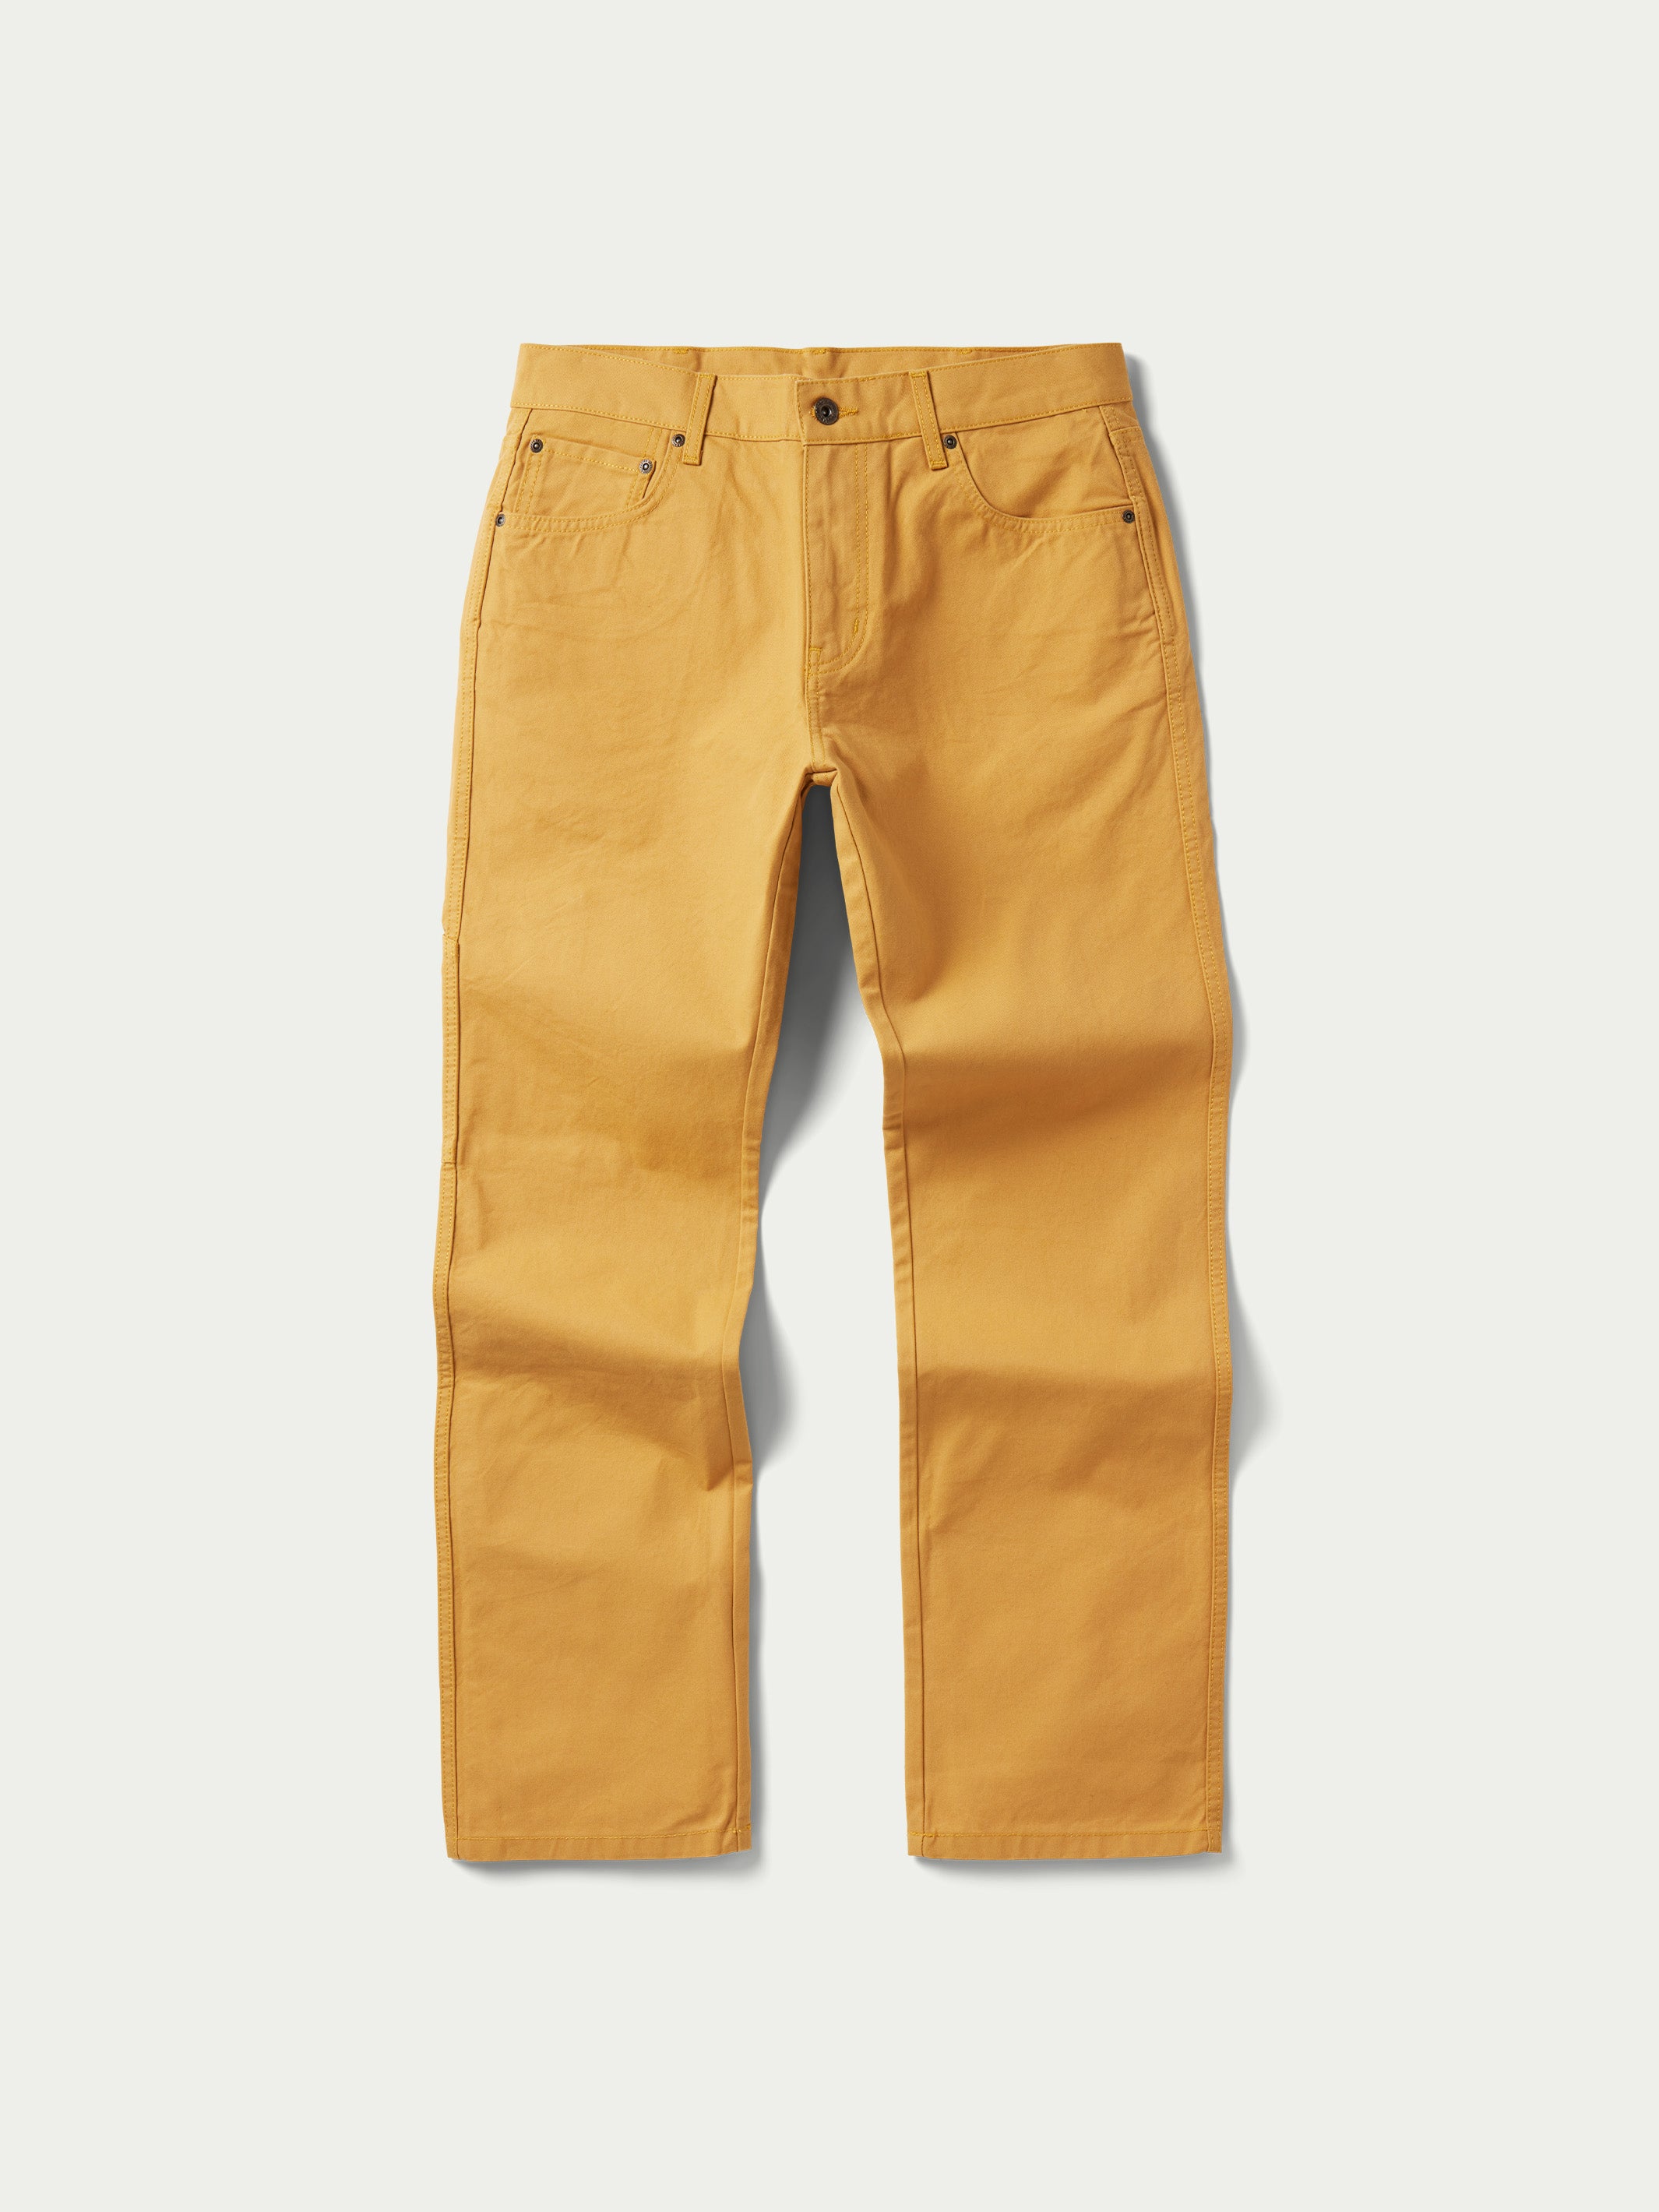 Men's Jeans & Trousers | Schaefer Outfitter